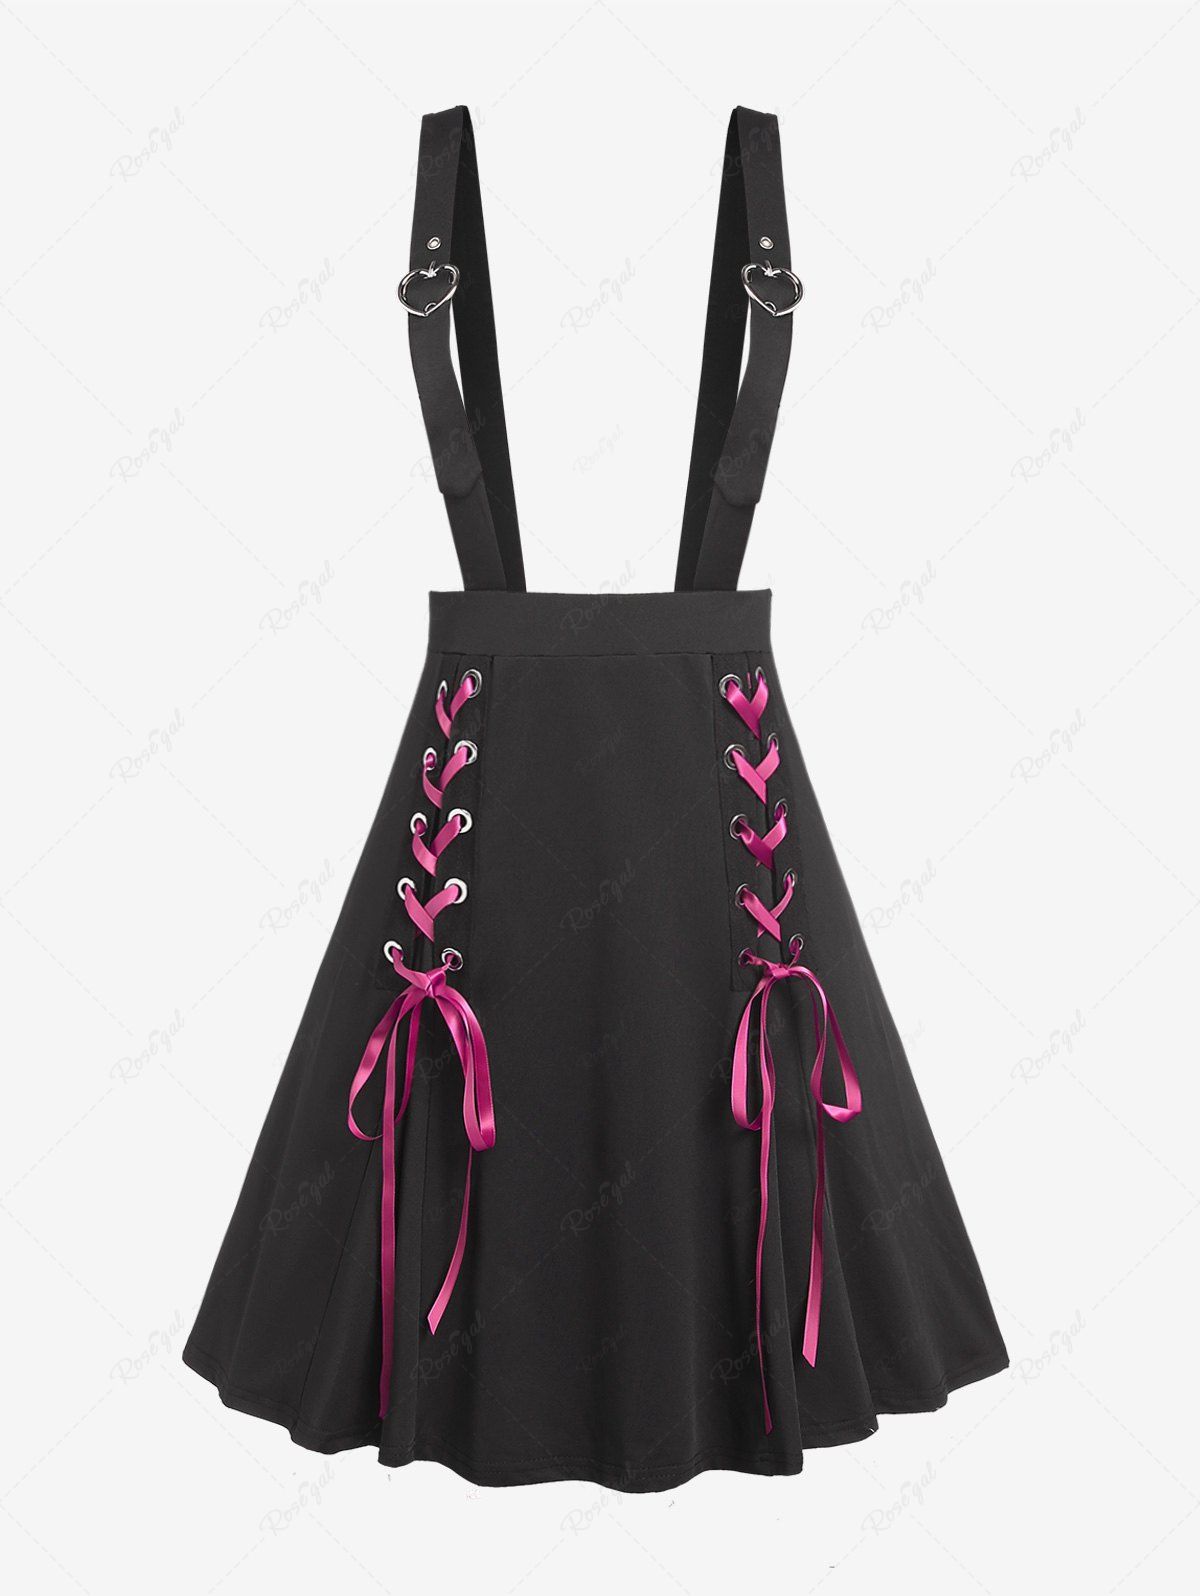 Hot Plus Size Heart Buckles Lace Up Suspender Skirt  